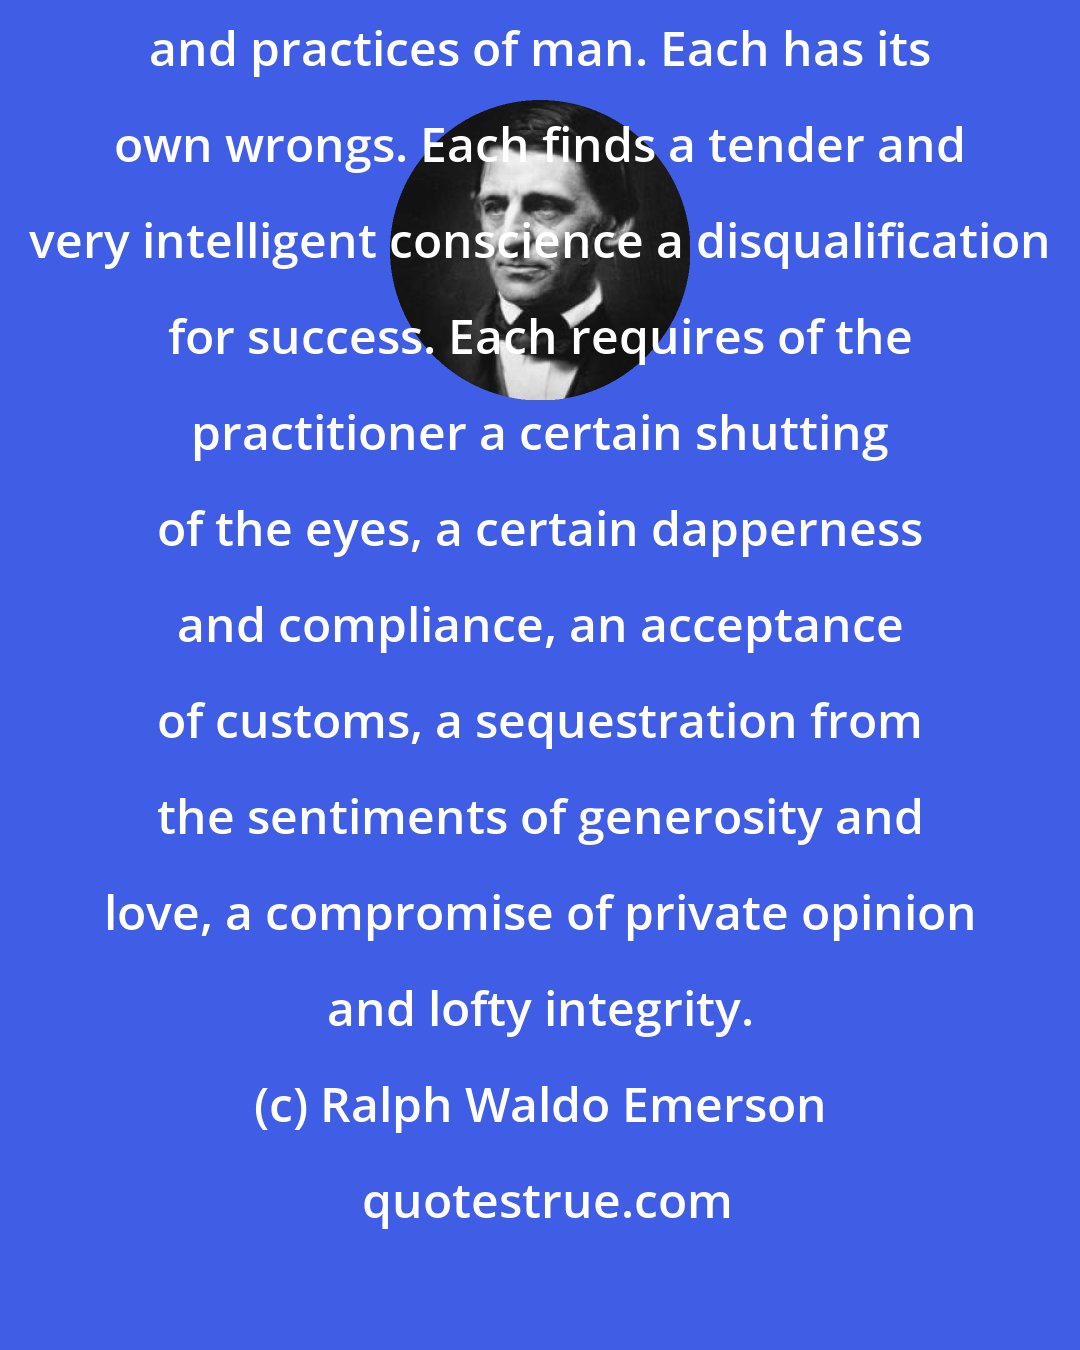 Ralph Waldo Emerson: The trail of the serpent reaches into all the lucrative professions and practices of man. Each has its own wrongs. Each finds a tender and very intelligent conscience a disqualification for success. Each requires of the practitioner a certain shutting of the eyes, a certain dapperness and compliance, an acceptance of customs, a sequestration from the sentiments of generosity and love, a compromise of private opinion and lofty integrity.